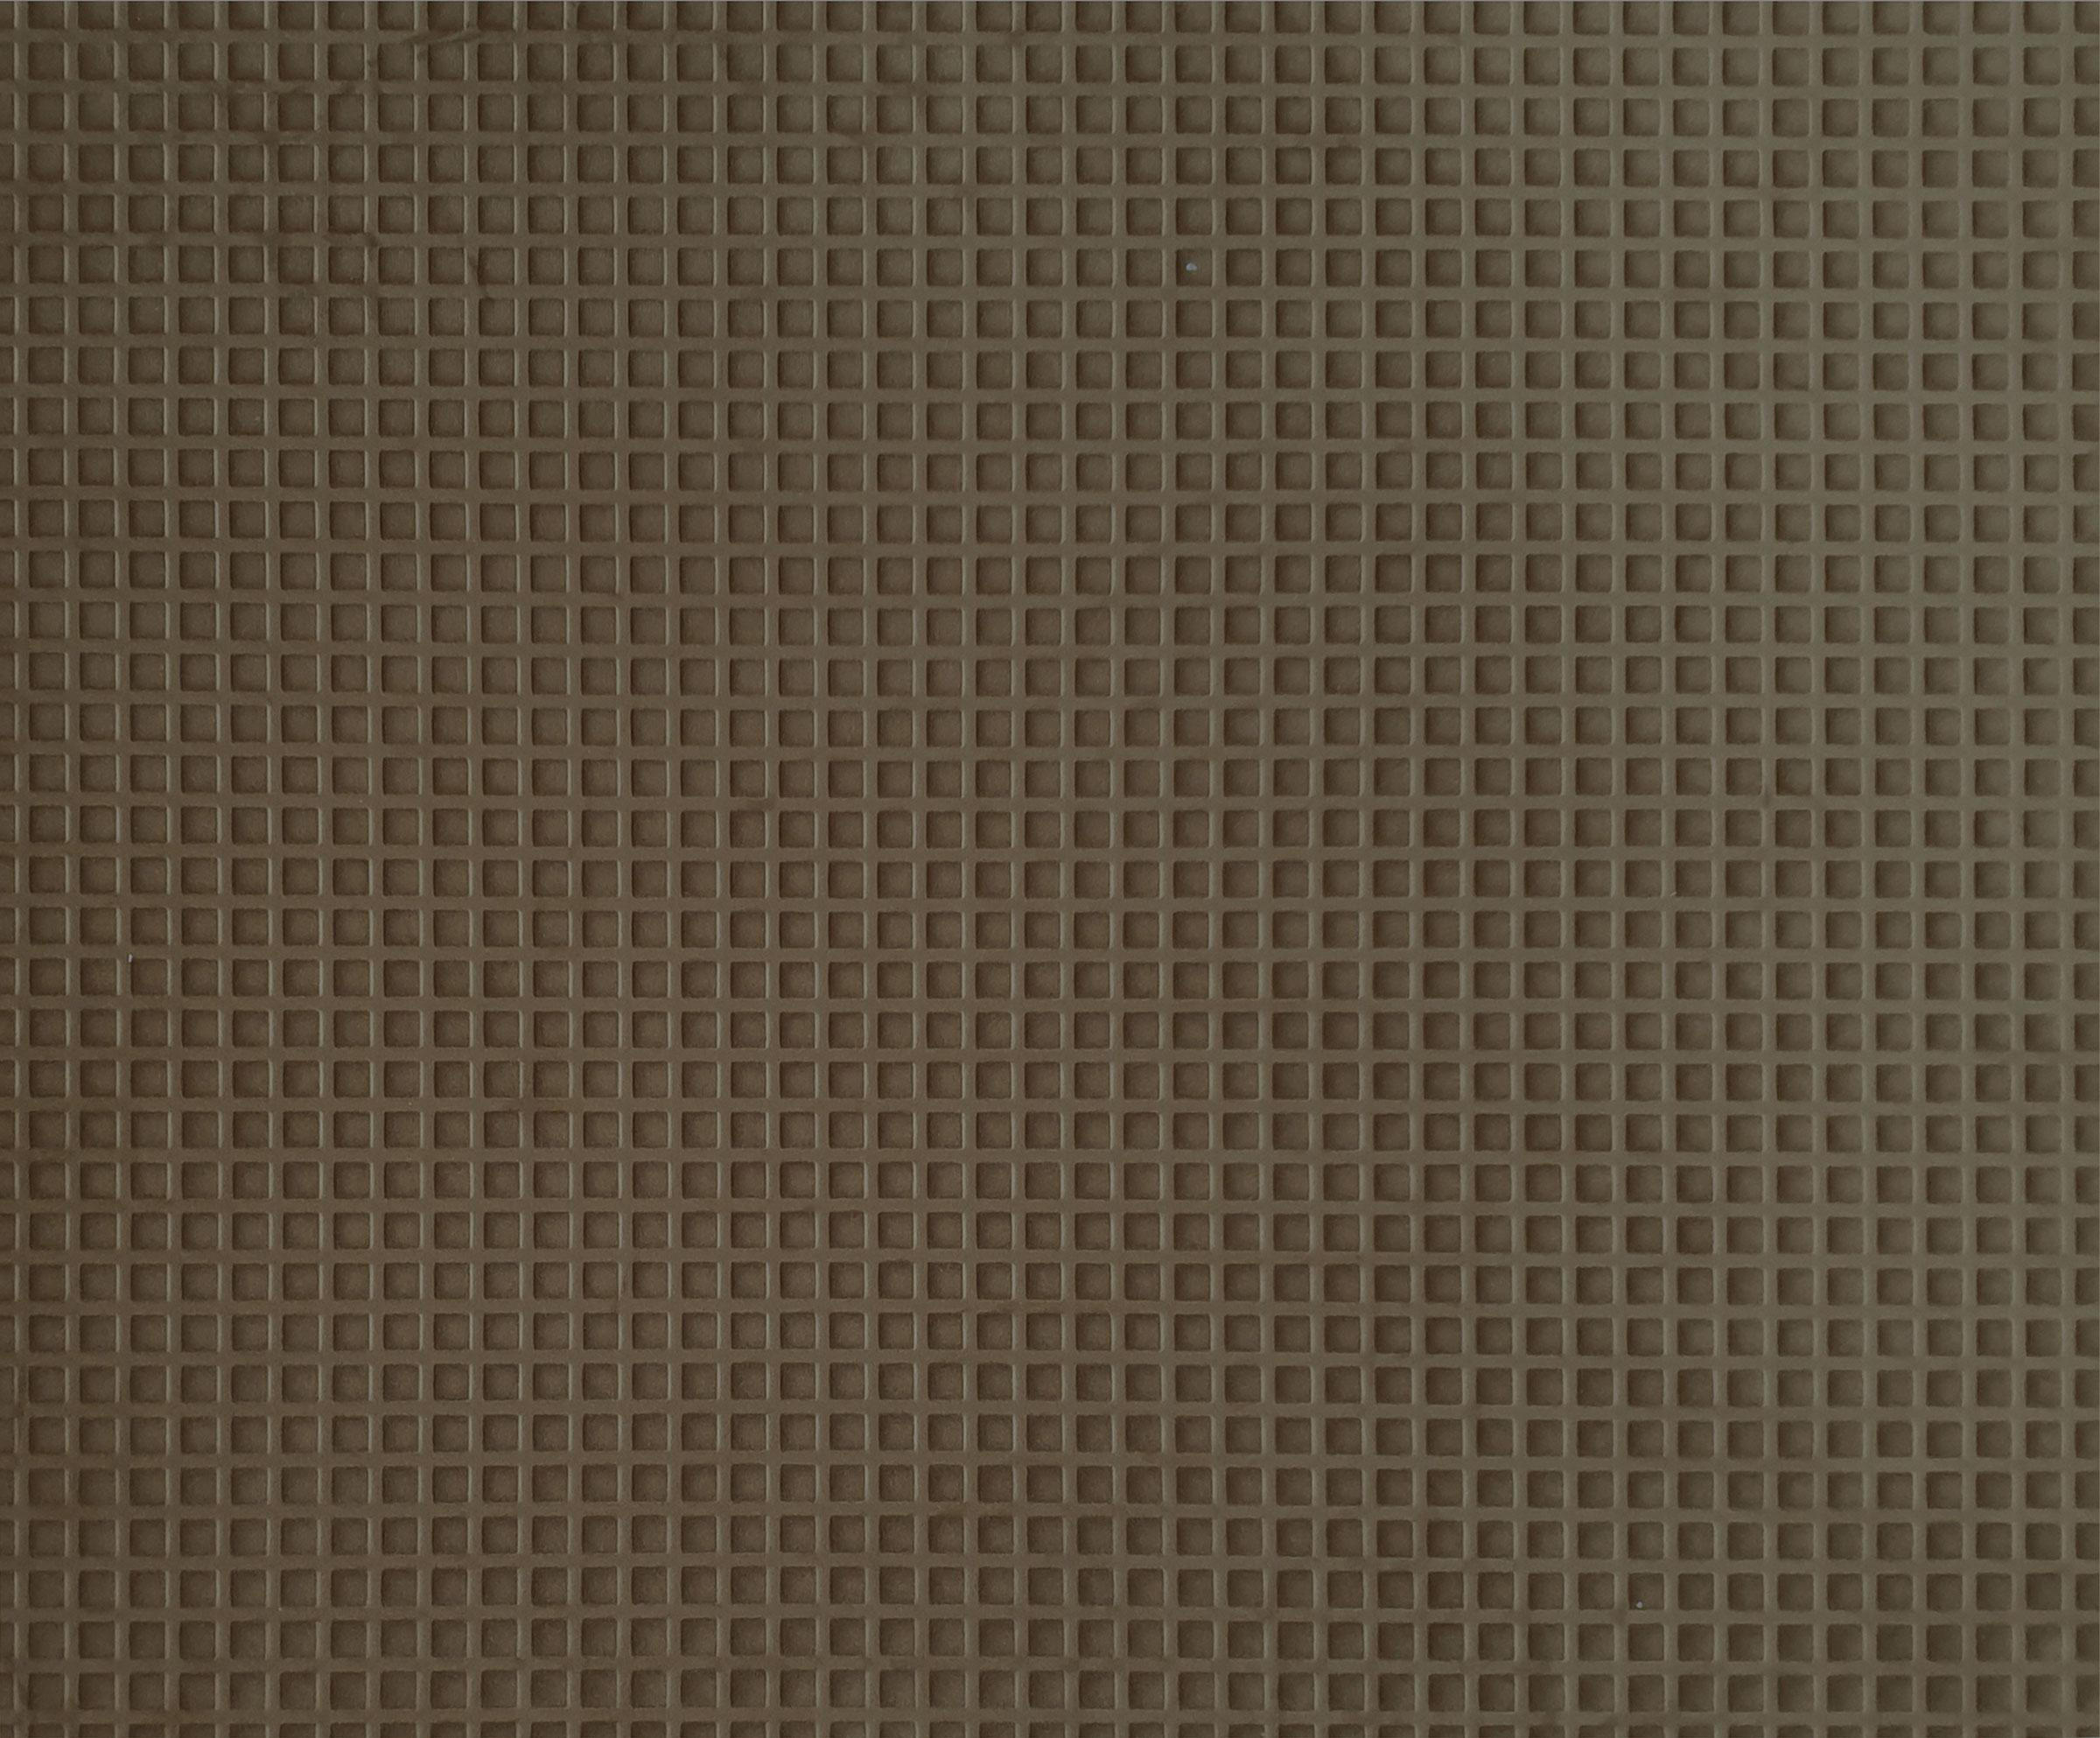 Fabric - Wall panel WallFace Fabric Collection 22719